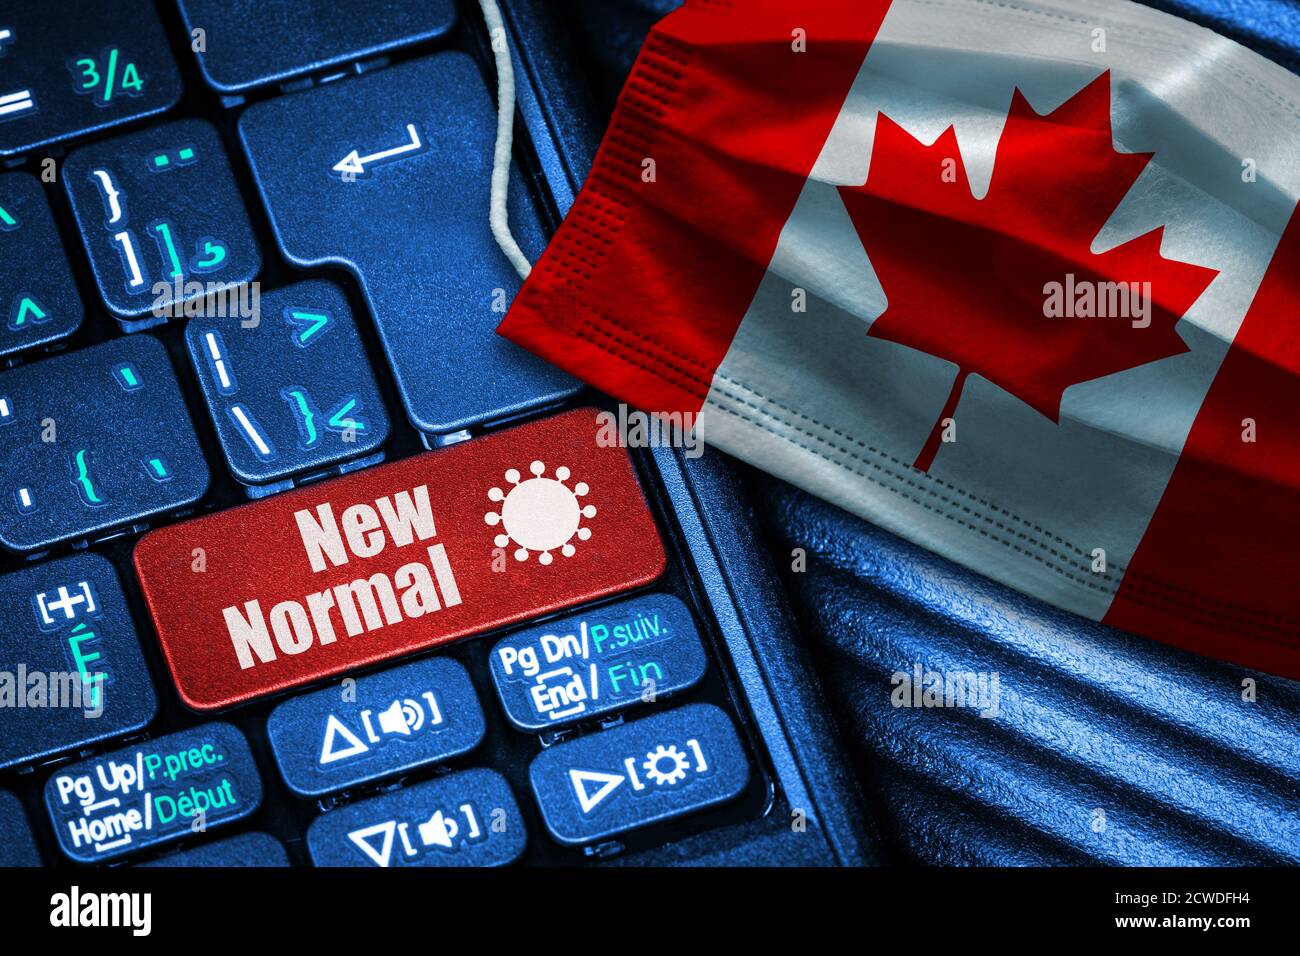 Concept of New Normal in Canada during Covid-19 with computer keyboard red button text and face mask showing Canadian Flag. Stock Photo